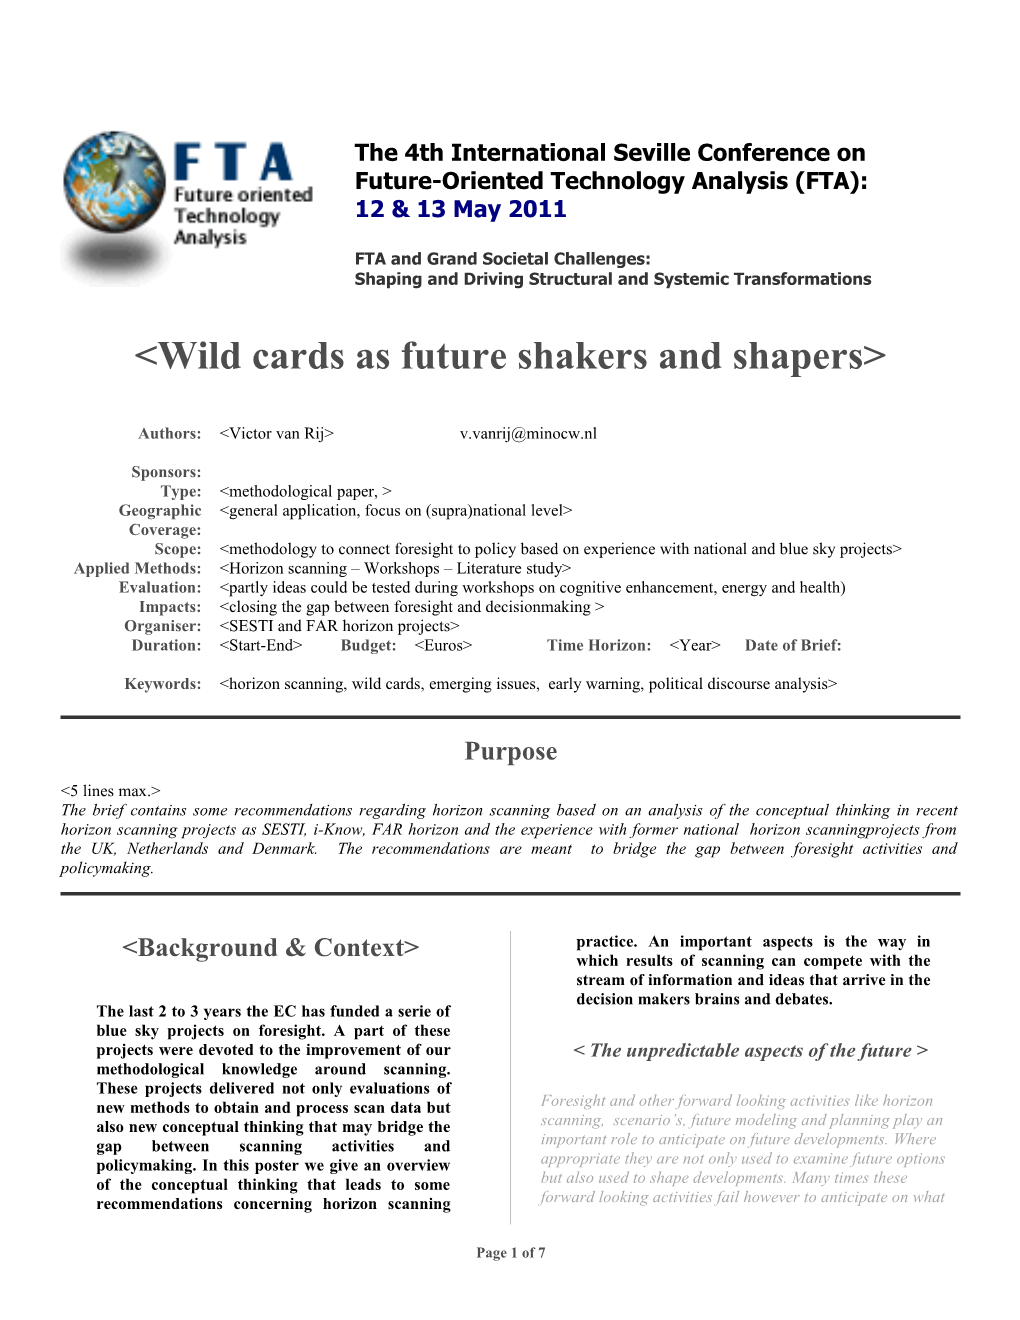 Wild Cards As Future Shakers and Shapers